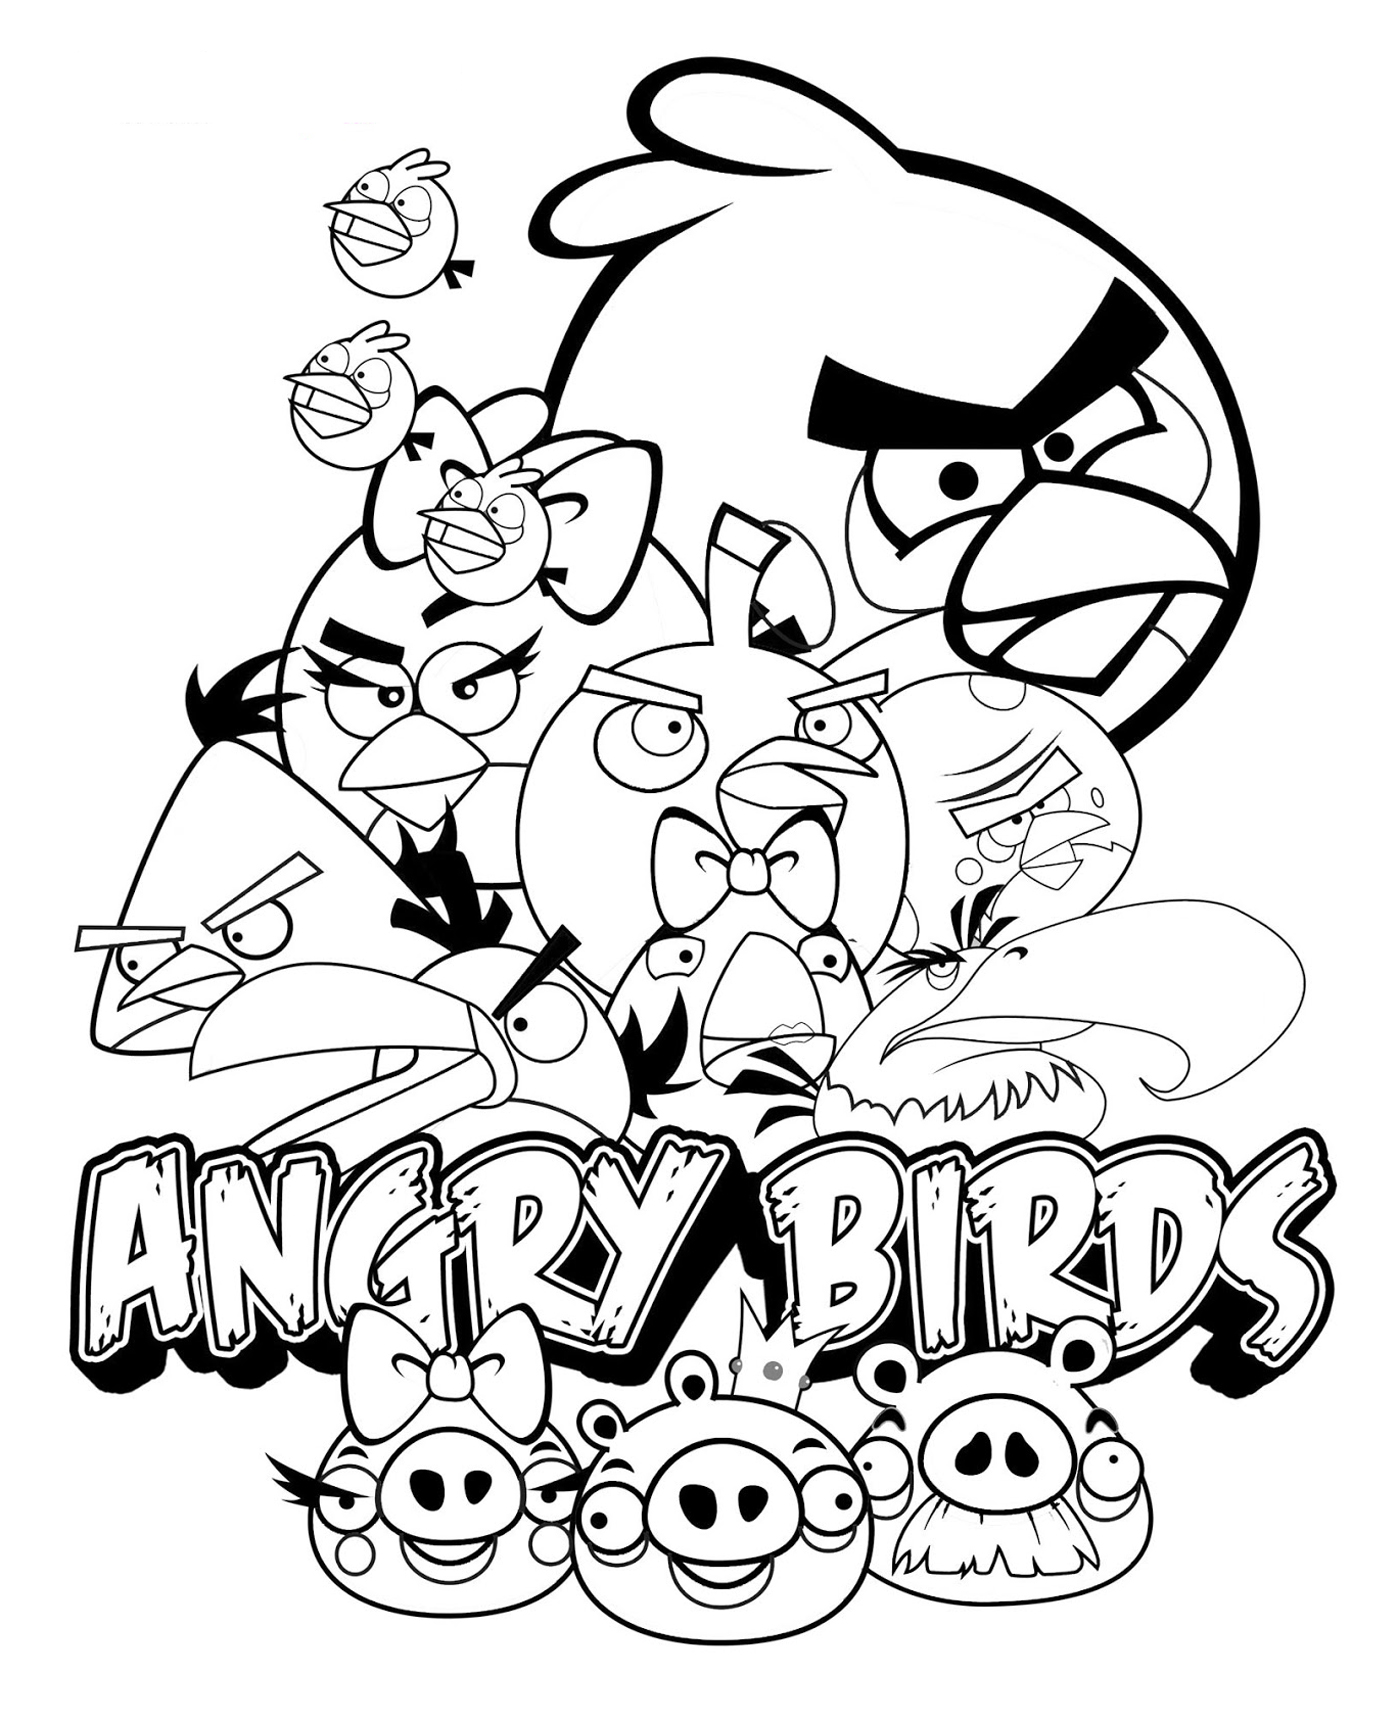 Angry birds coloring pages for kids Angry Birds Kids Coloring Pages